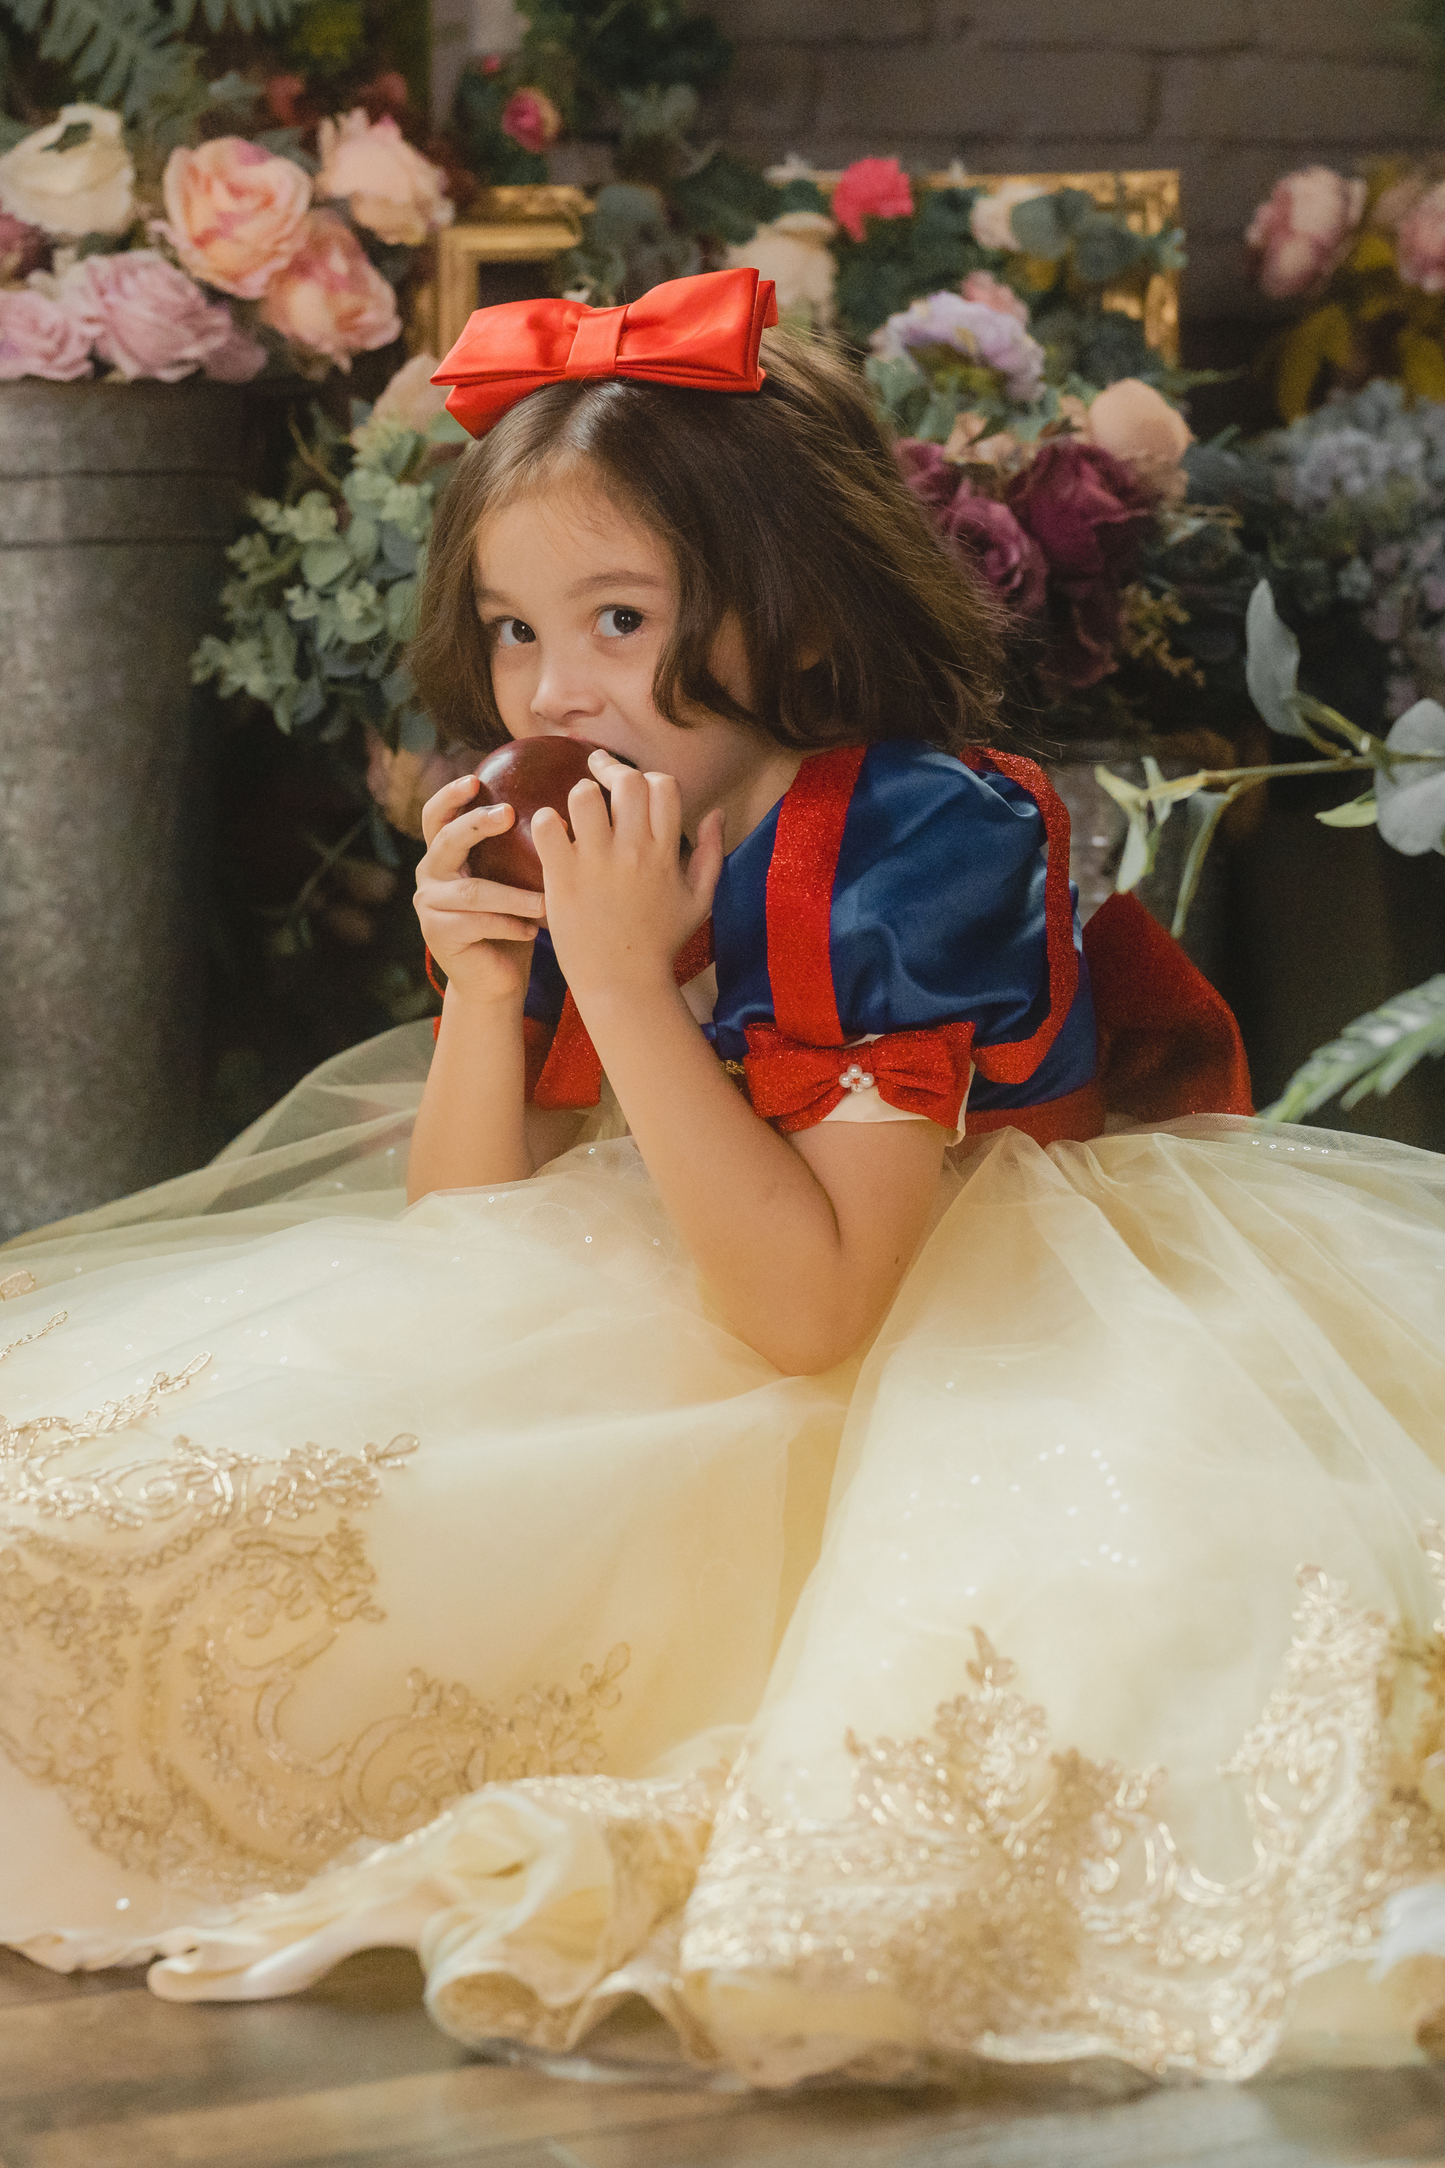 Snow White Blue, Red & Yellow Gown